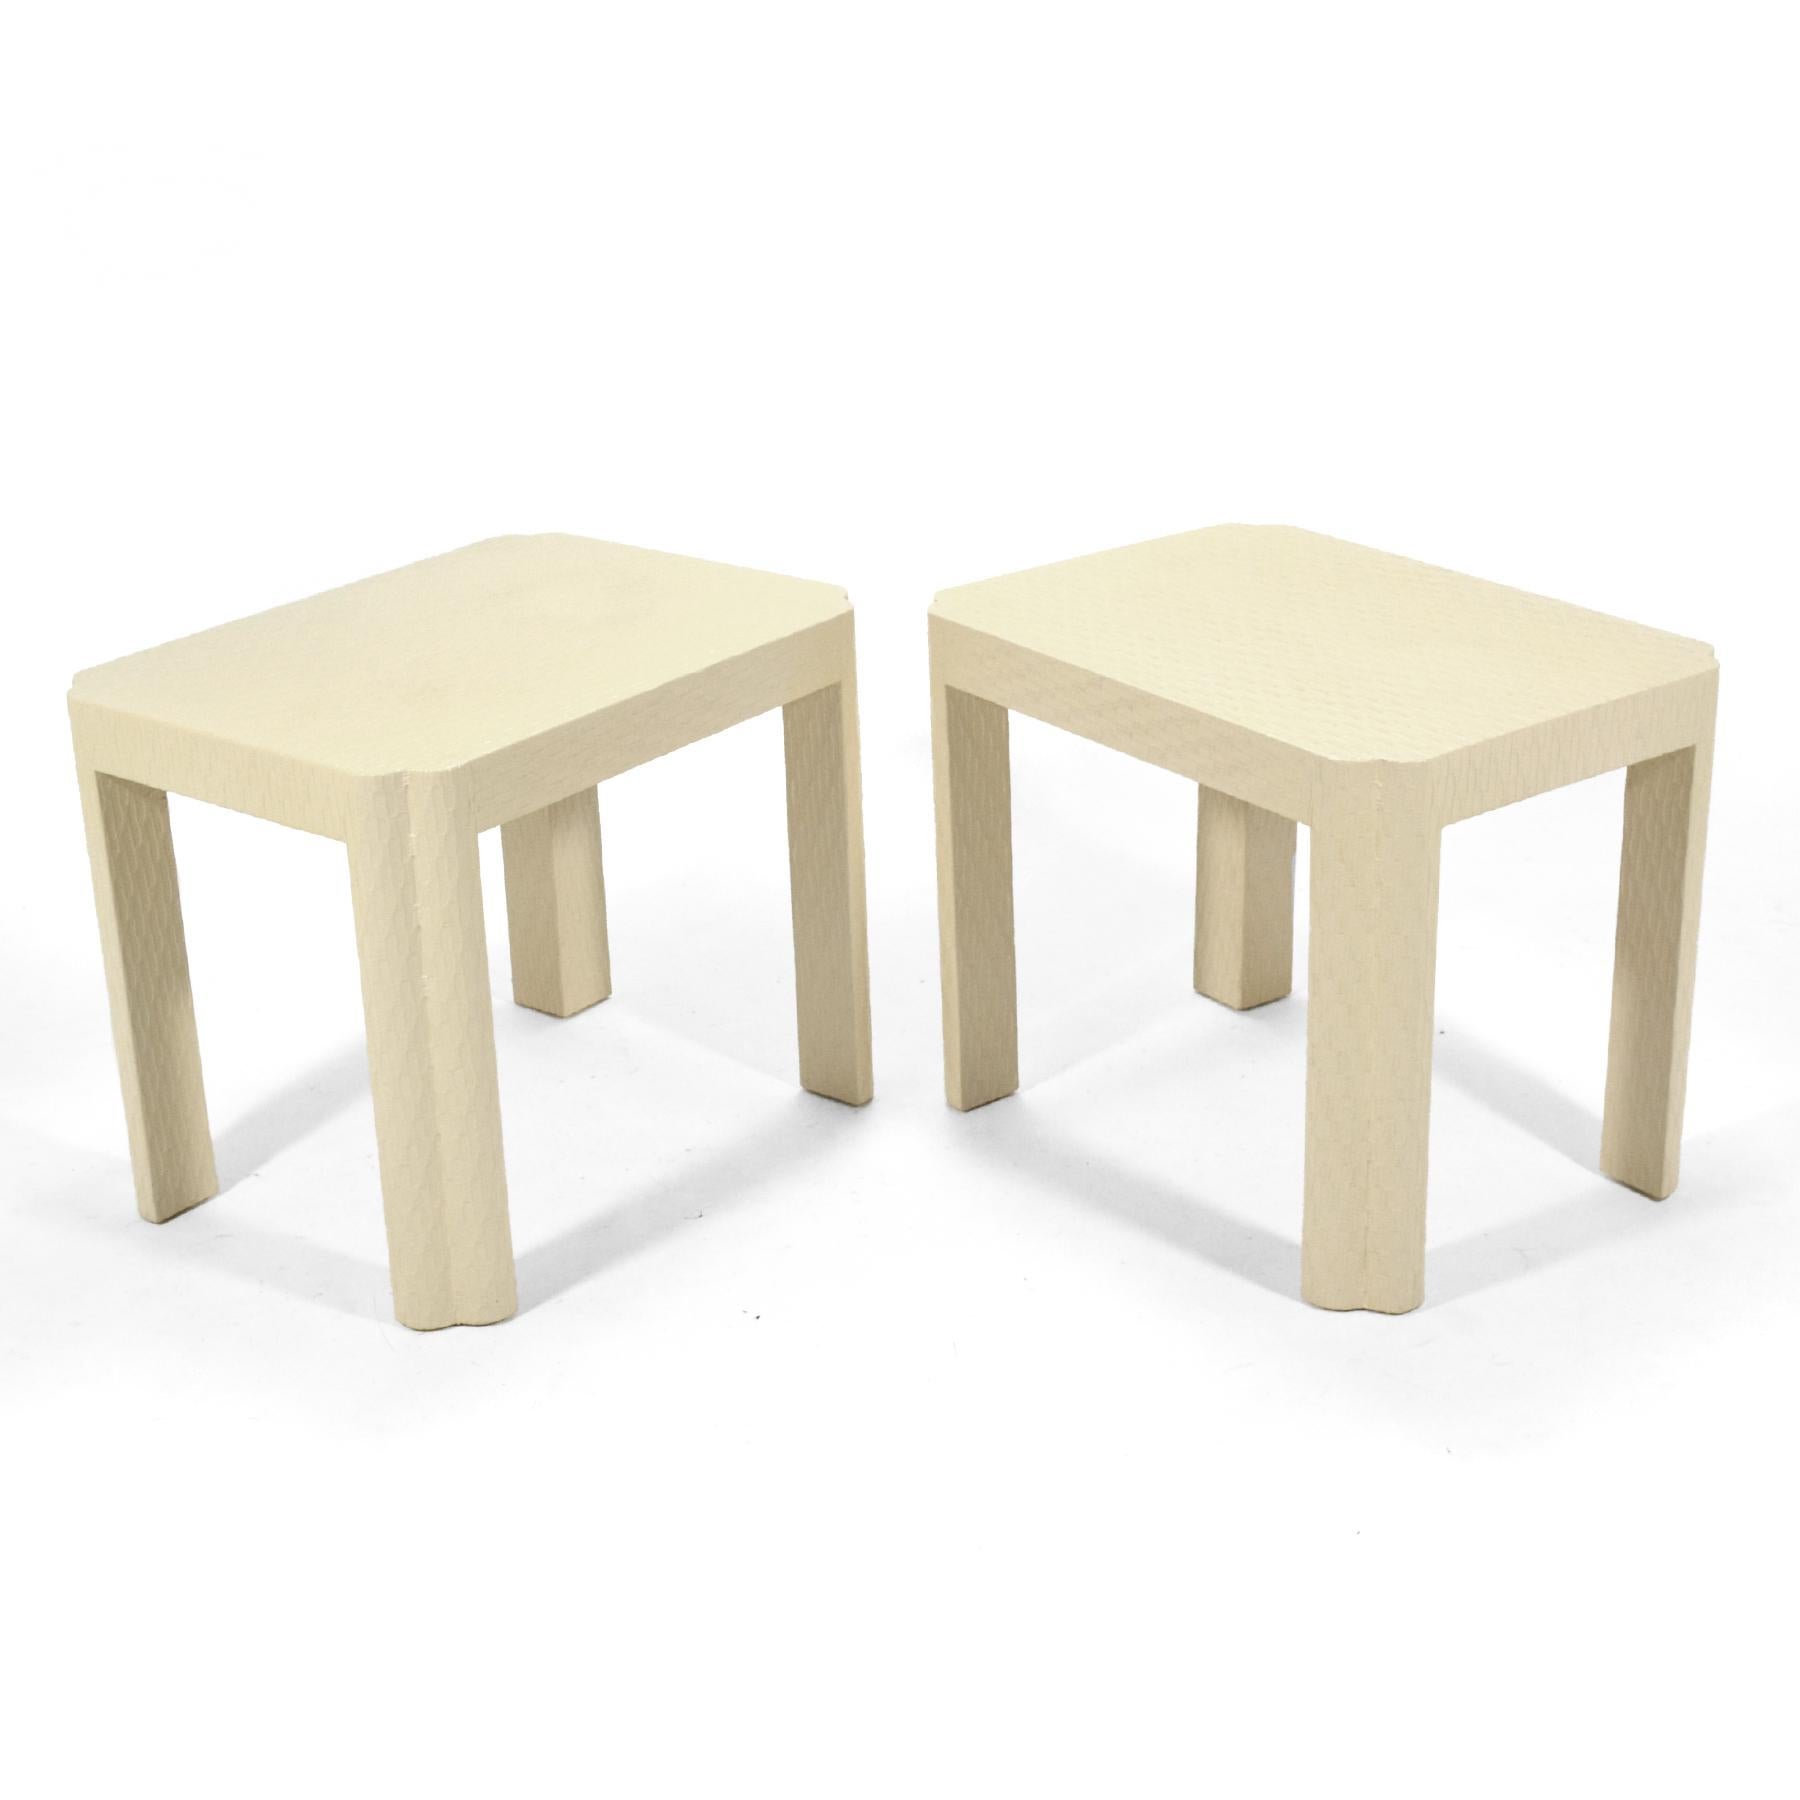 This pair of handsome side tables are very similar to the designs of Karl Springer. They are wrapped in a textured fabric, painted a warm ivory color, and have sculpted corners/ legs. Possibly made by Baker Furniture Co. they are unmarked.